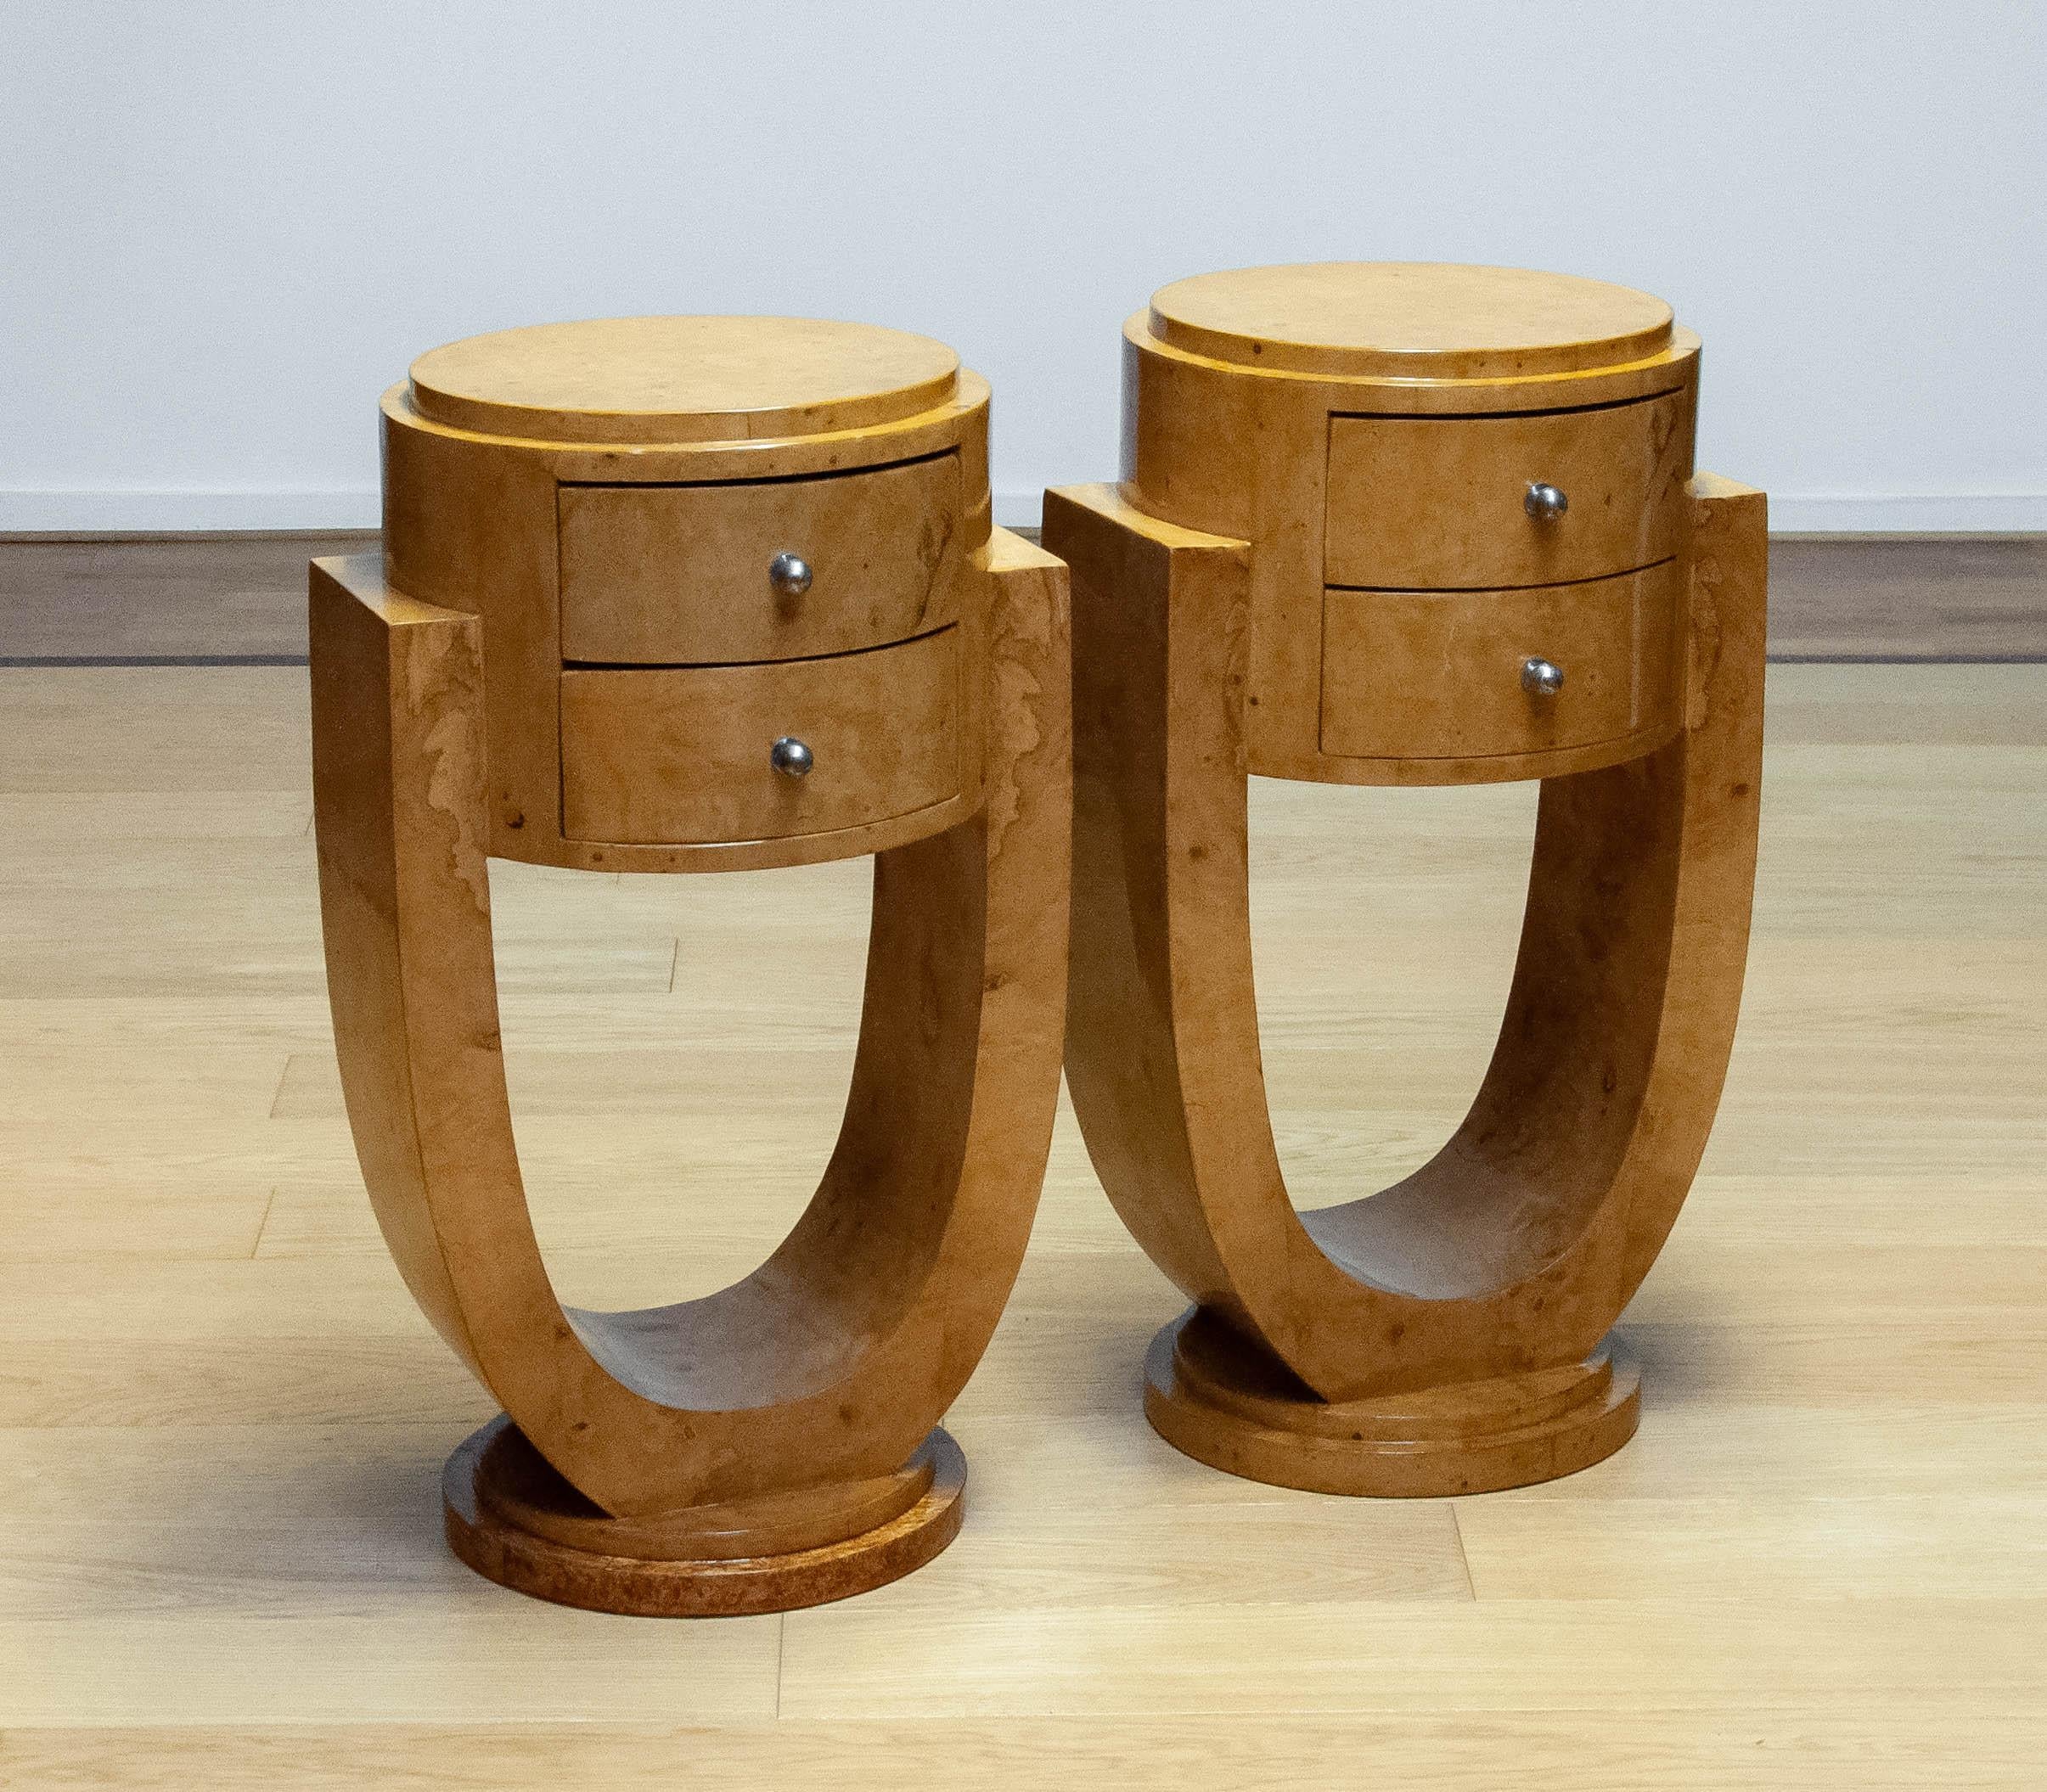 Matching Pair Round Shaped Art Deco Bedside Tables / Night Stands In Poplar Burl In Good Condition In Silvolde, Gelderland